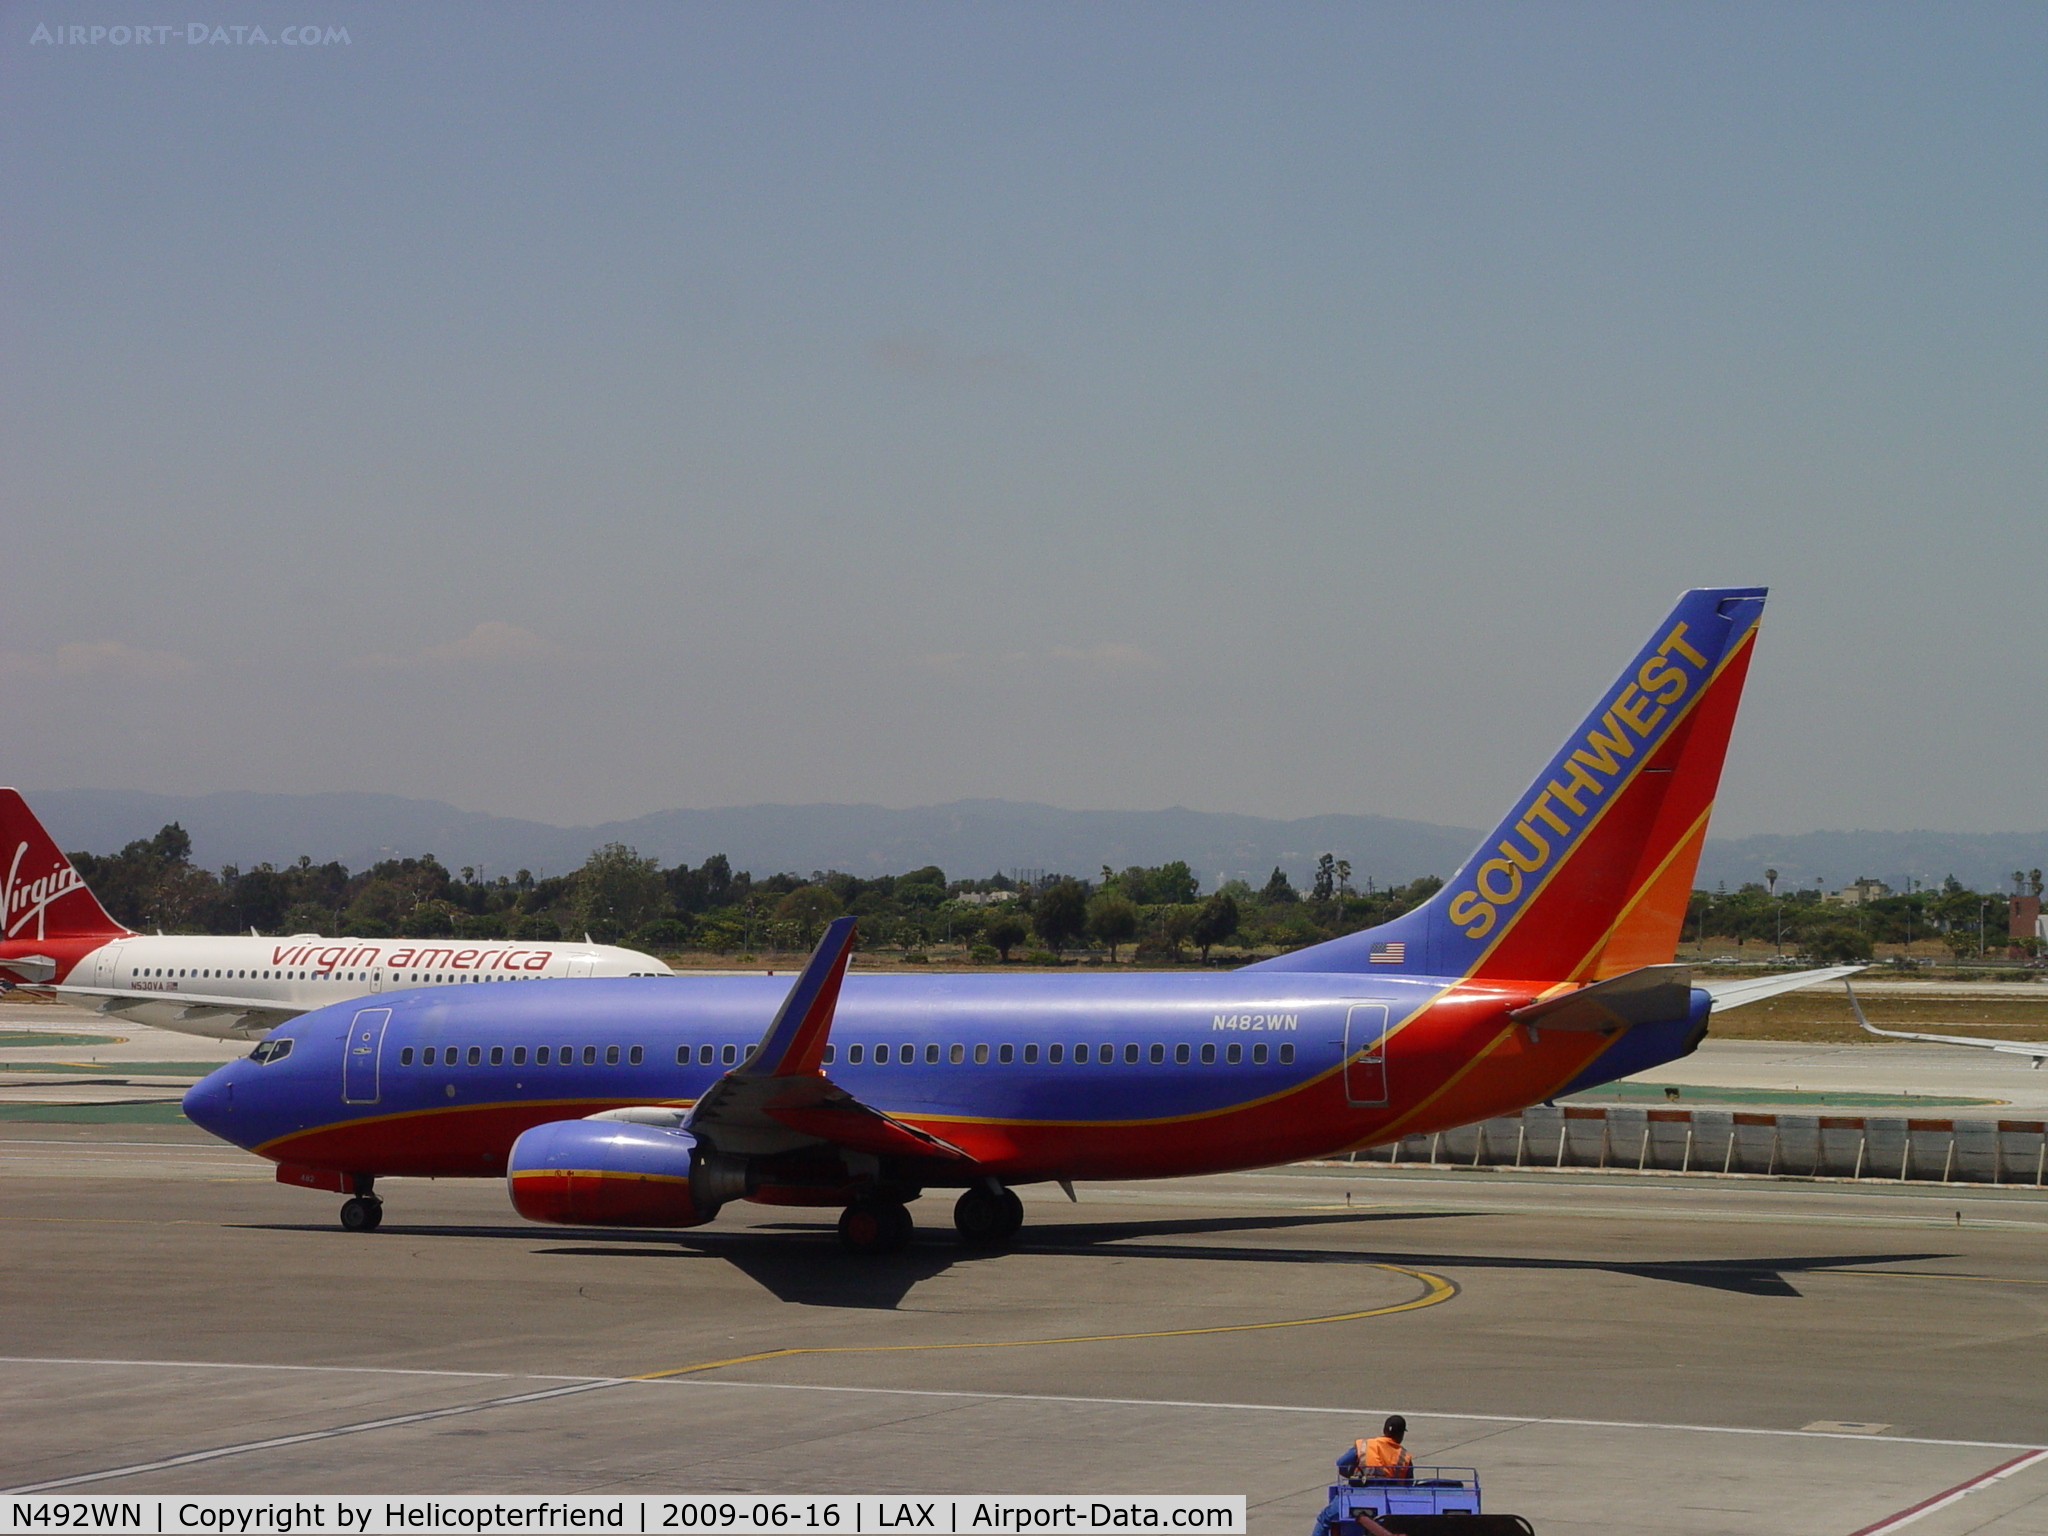 N492WN, 2004 Boeing 737-7H4 C/N 33866, taxiing westbound to turn around and come back to 24L